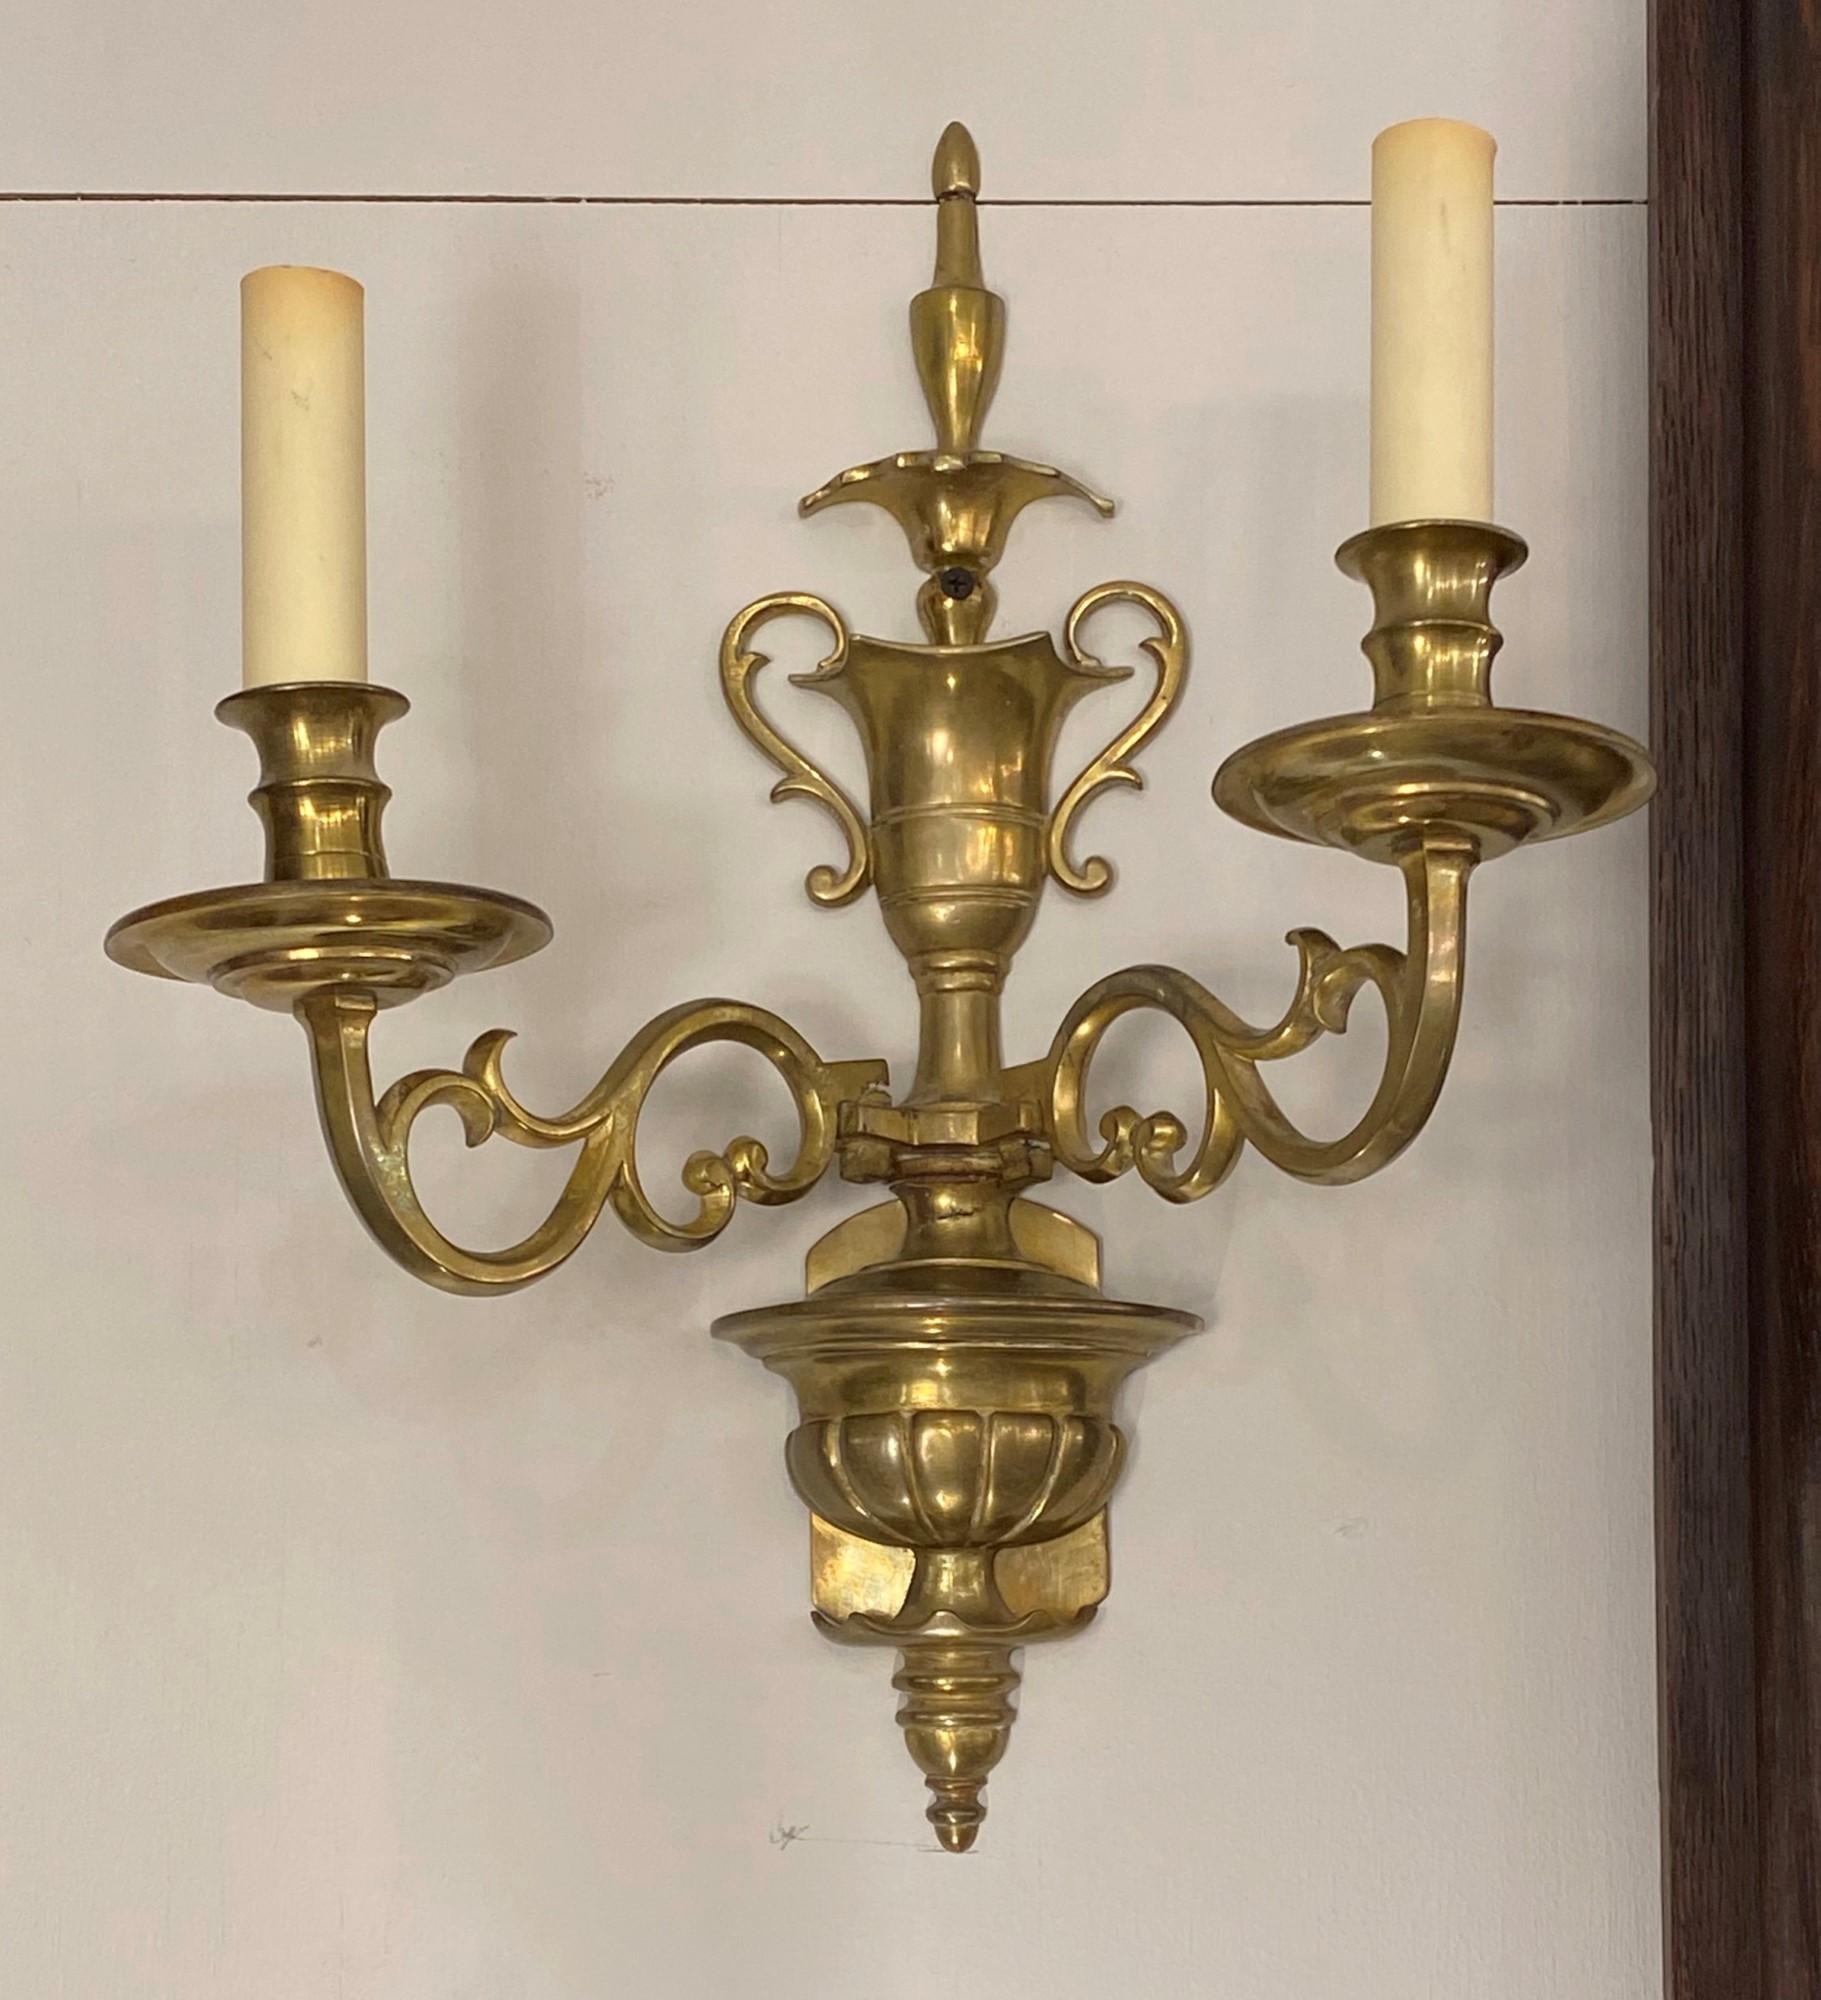 1920s pair of solid brass two arm sconces signed E.F. Caldwell, NYC. Cleaned and rewired. Please note, this item is located in one of our NYC locations.